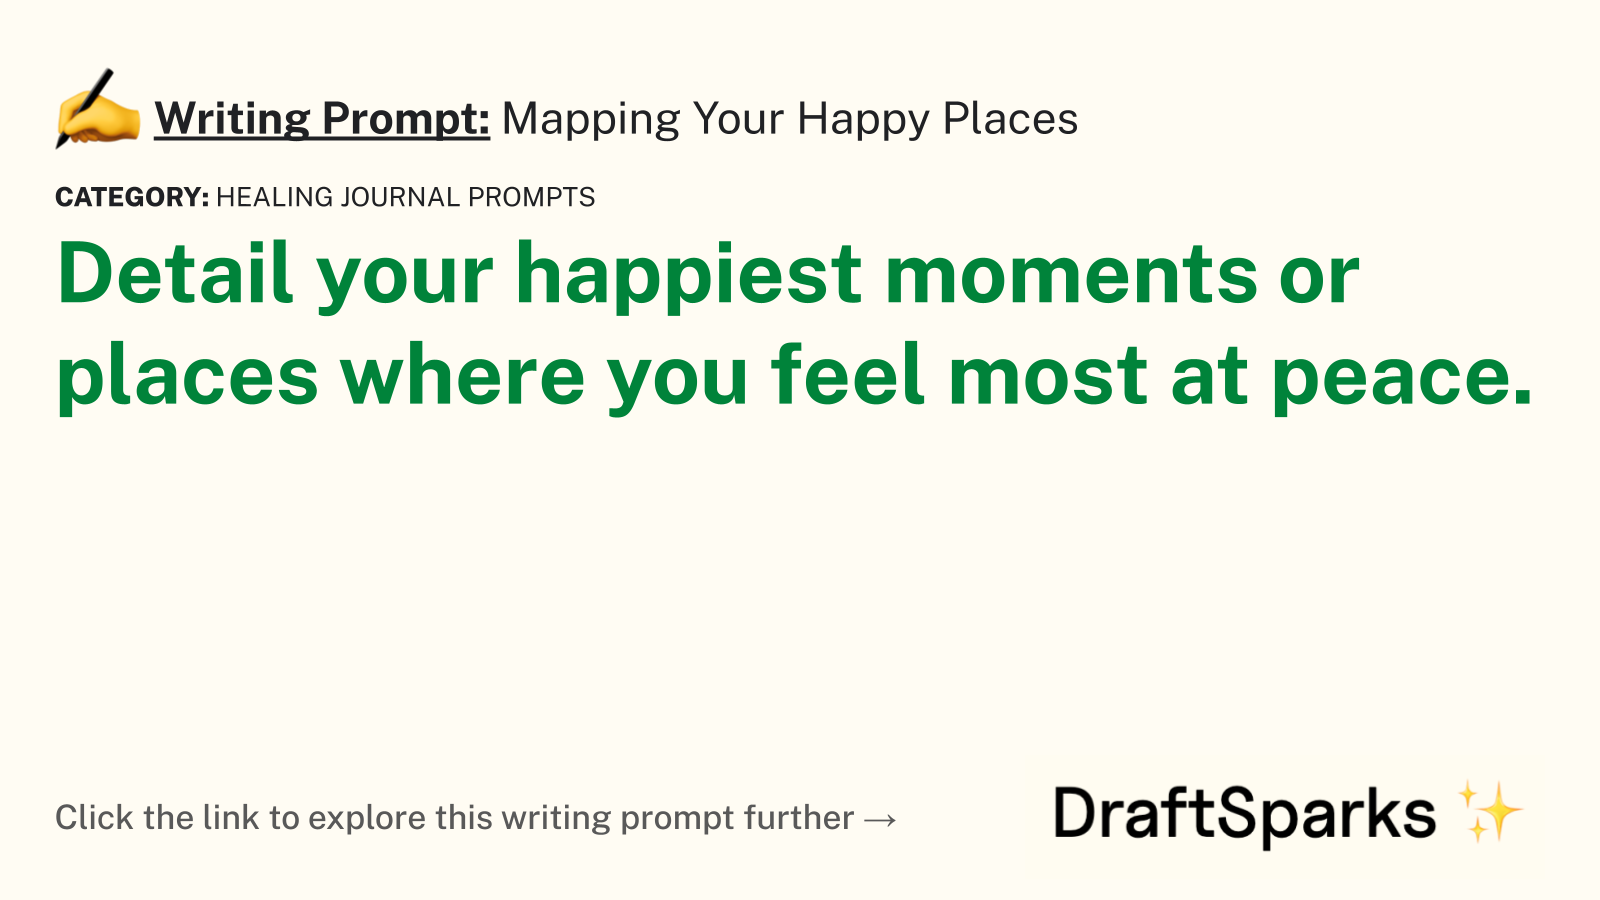 Mapping Your Happy Places